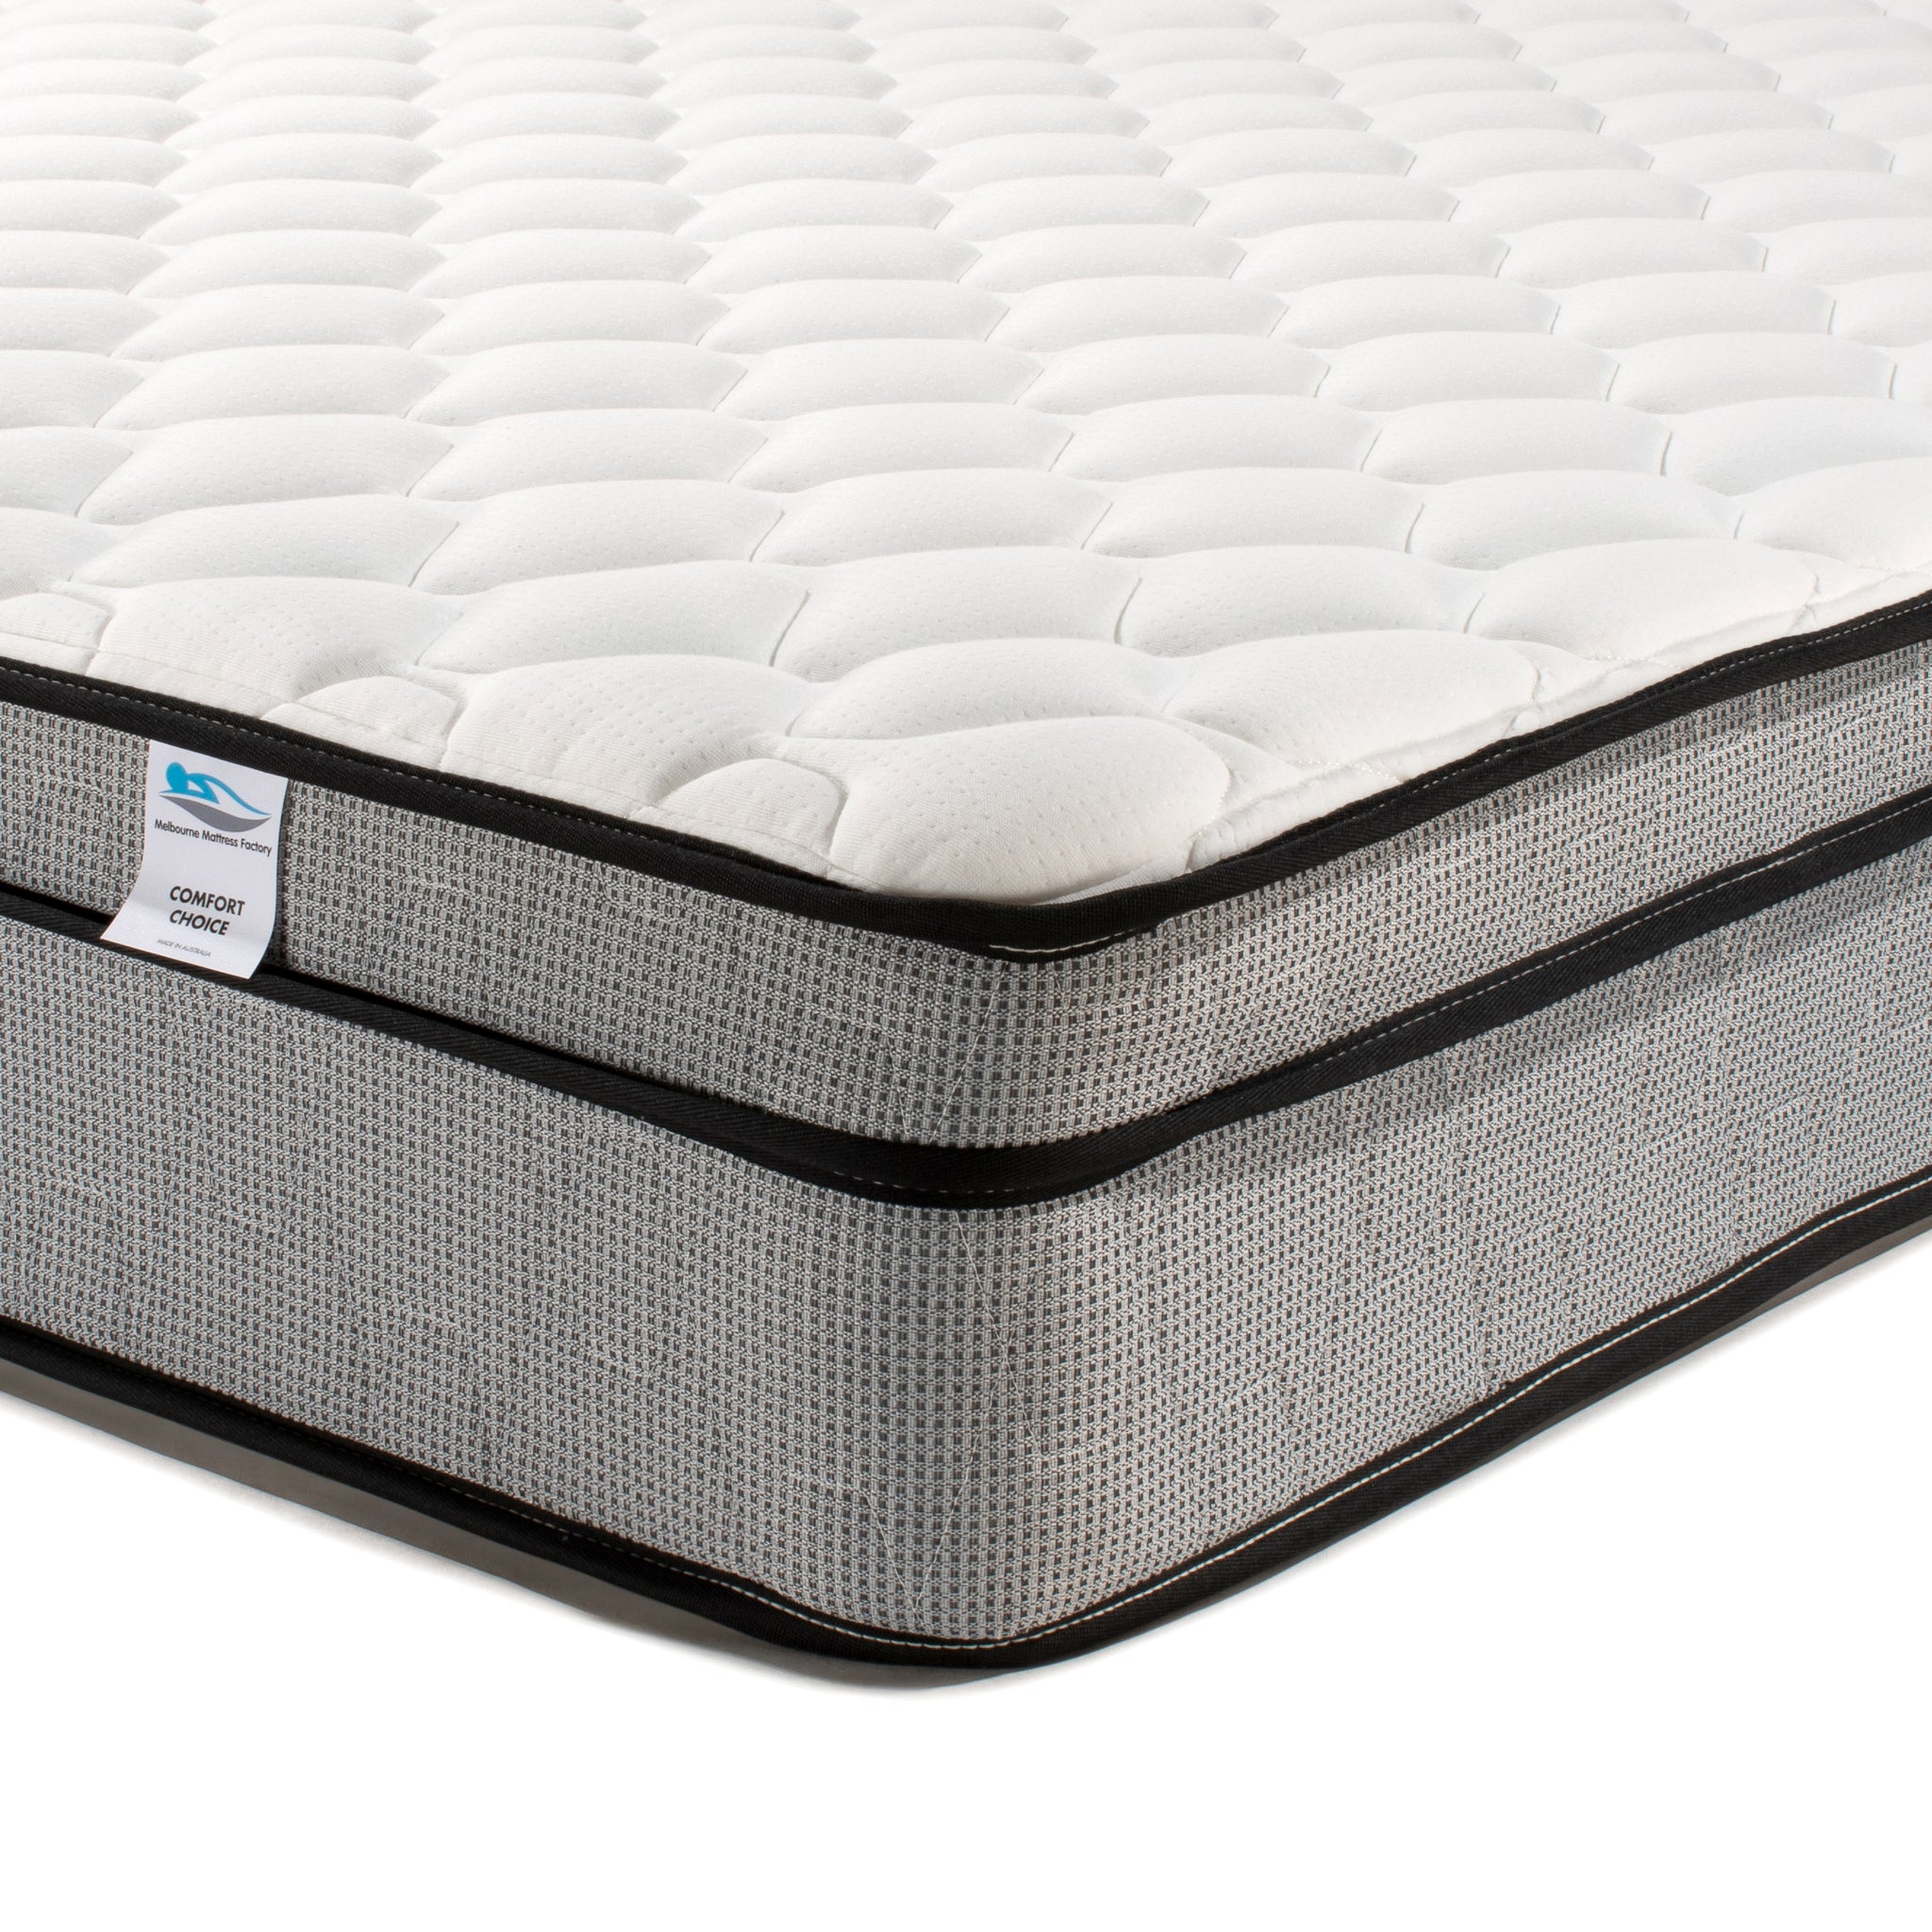 Comfort Choice Super King Size Innerspring Mattress - 3 Comfort options  - Australian Made - 15 Year Warranty - Free Delivery - Melbourne Mattress Factory